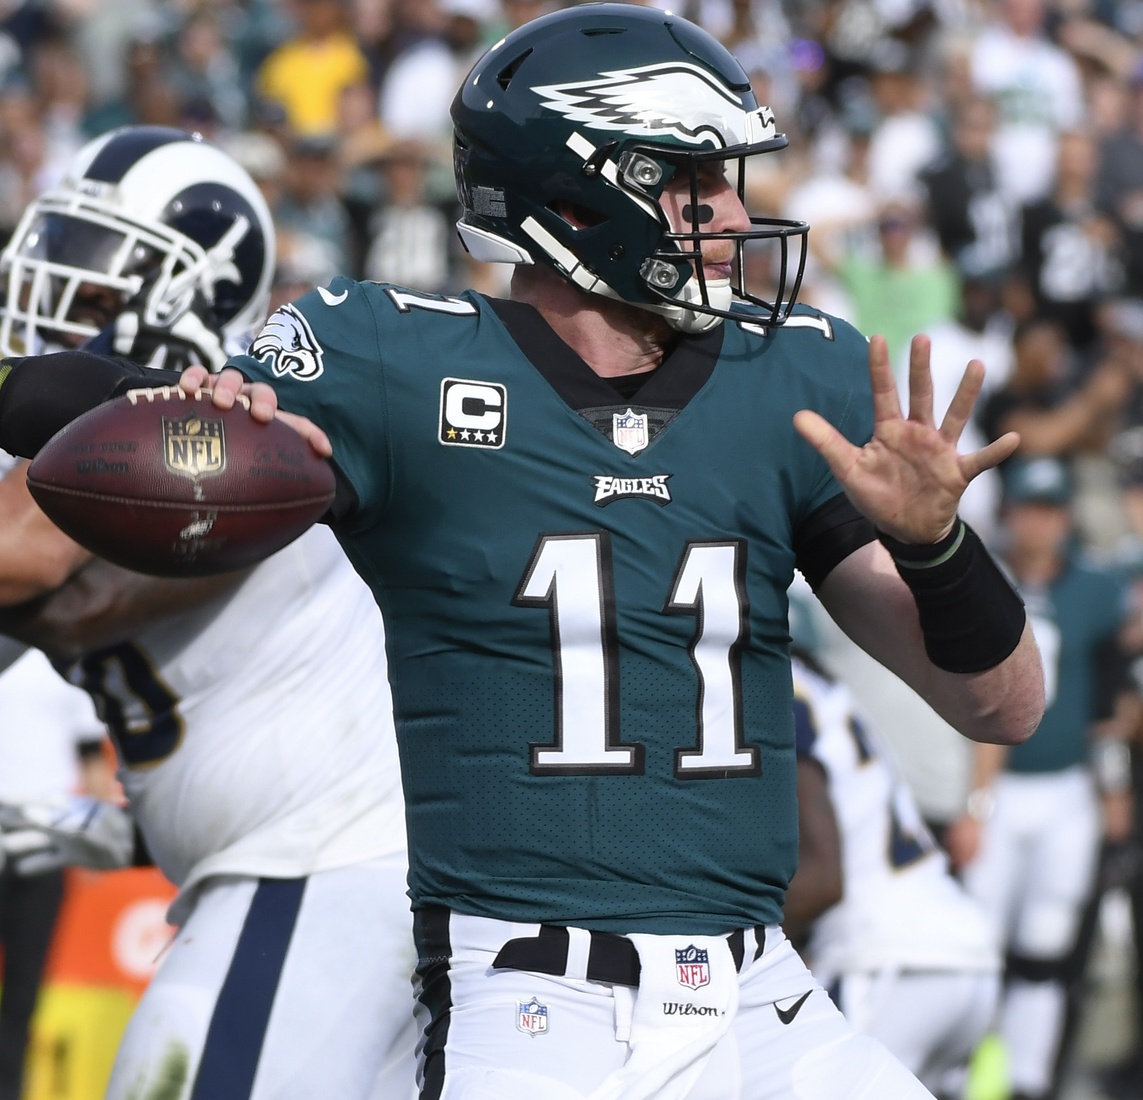 Eagles Not Totally Sure About Extent of Carson Wentz’s Injury